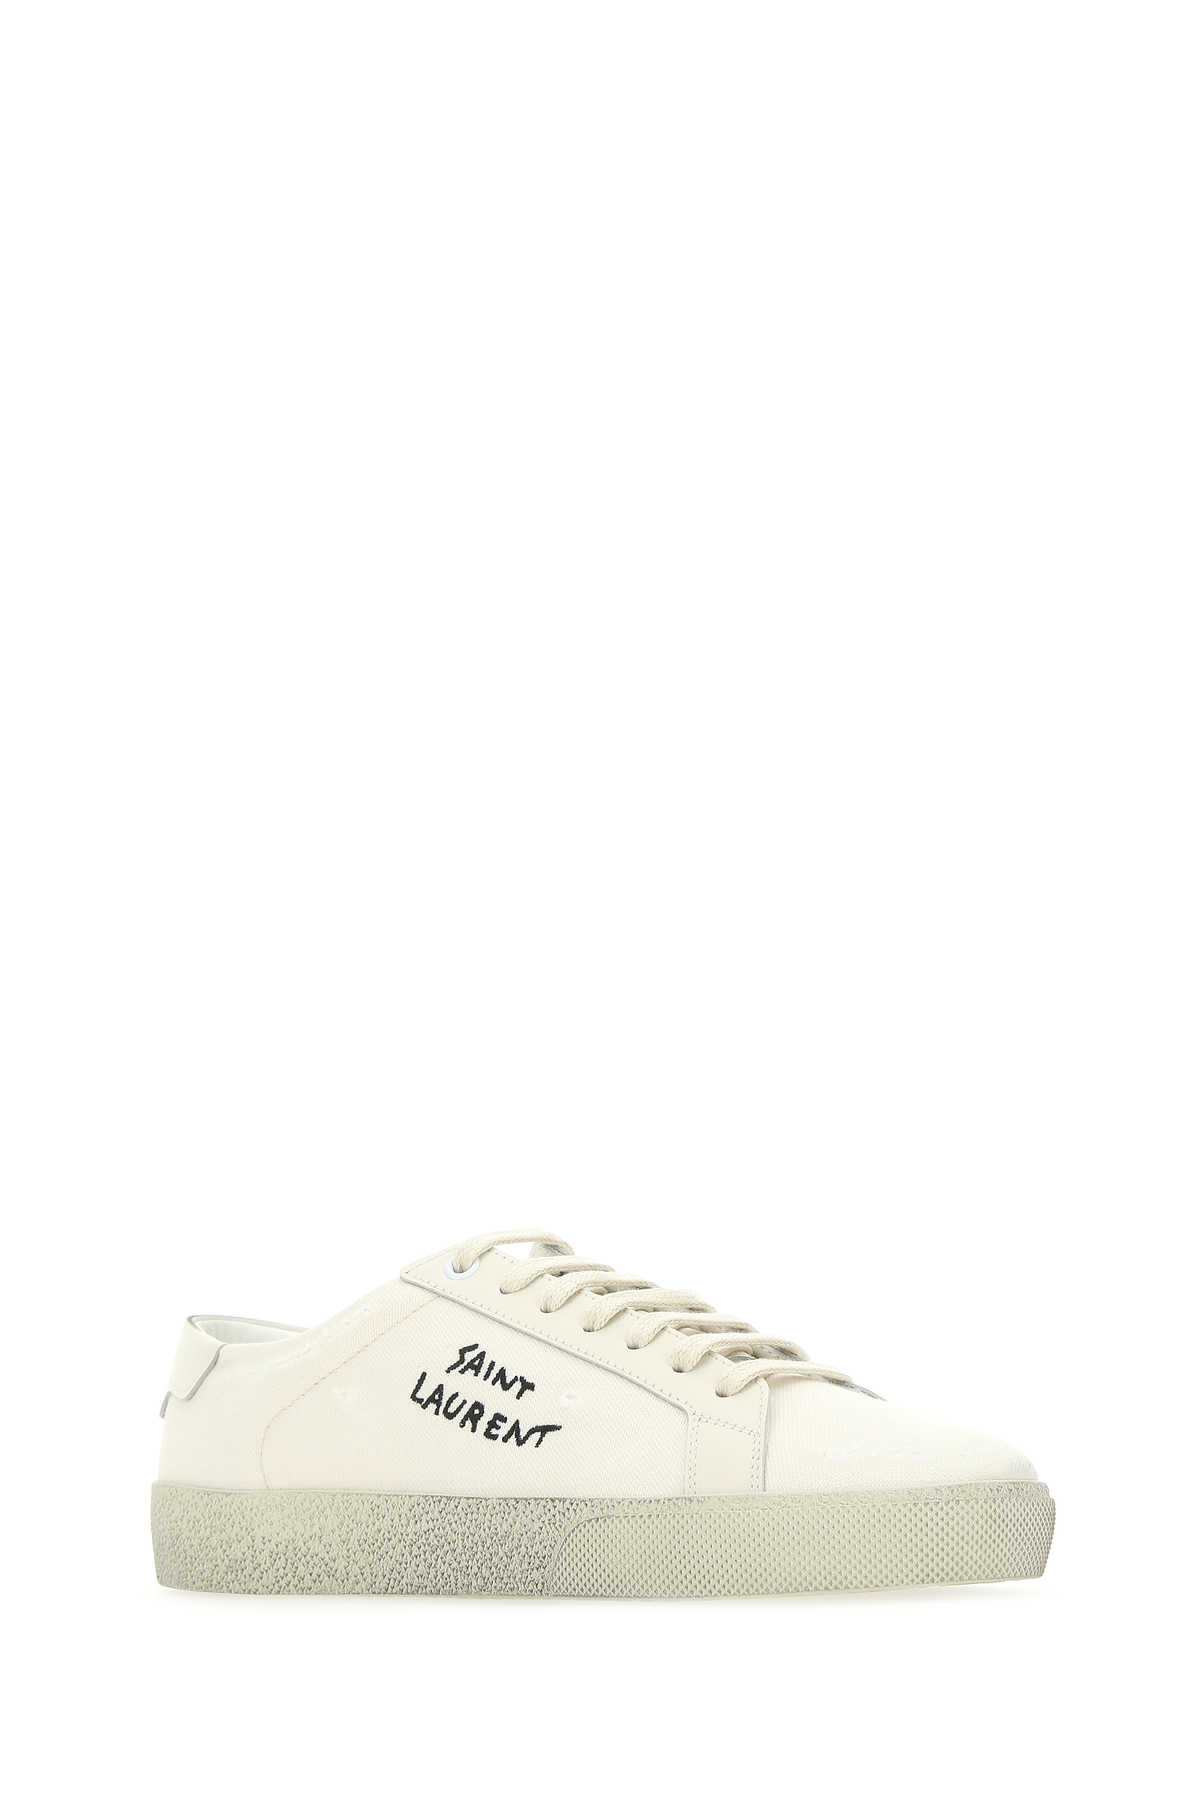 Saint Laurent Ivory Canvas Sl/06 Trainers In 9113